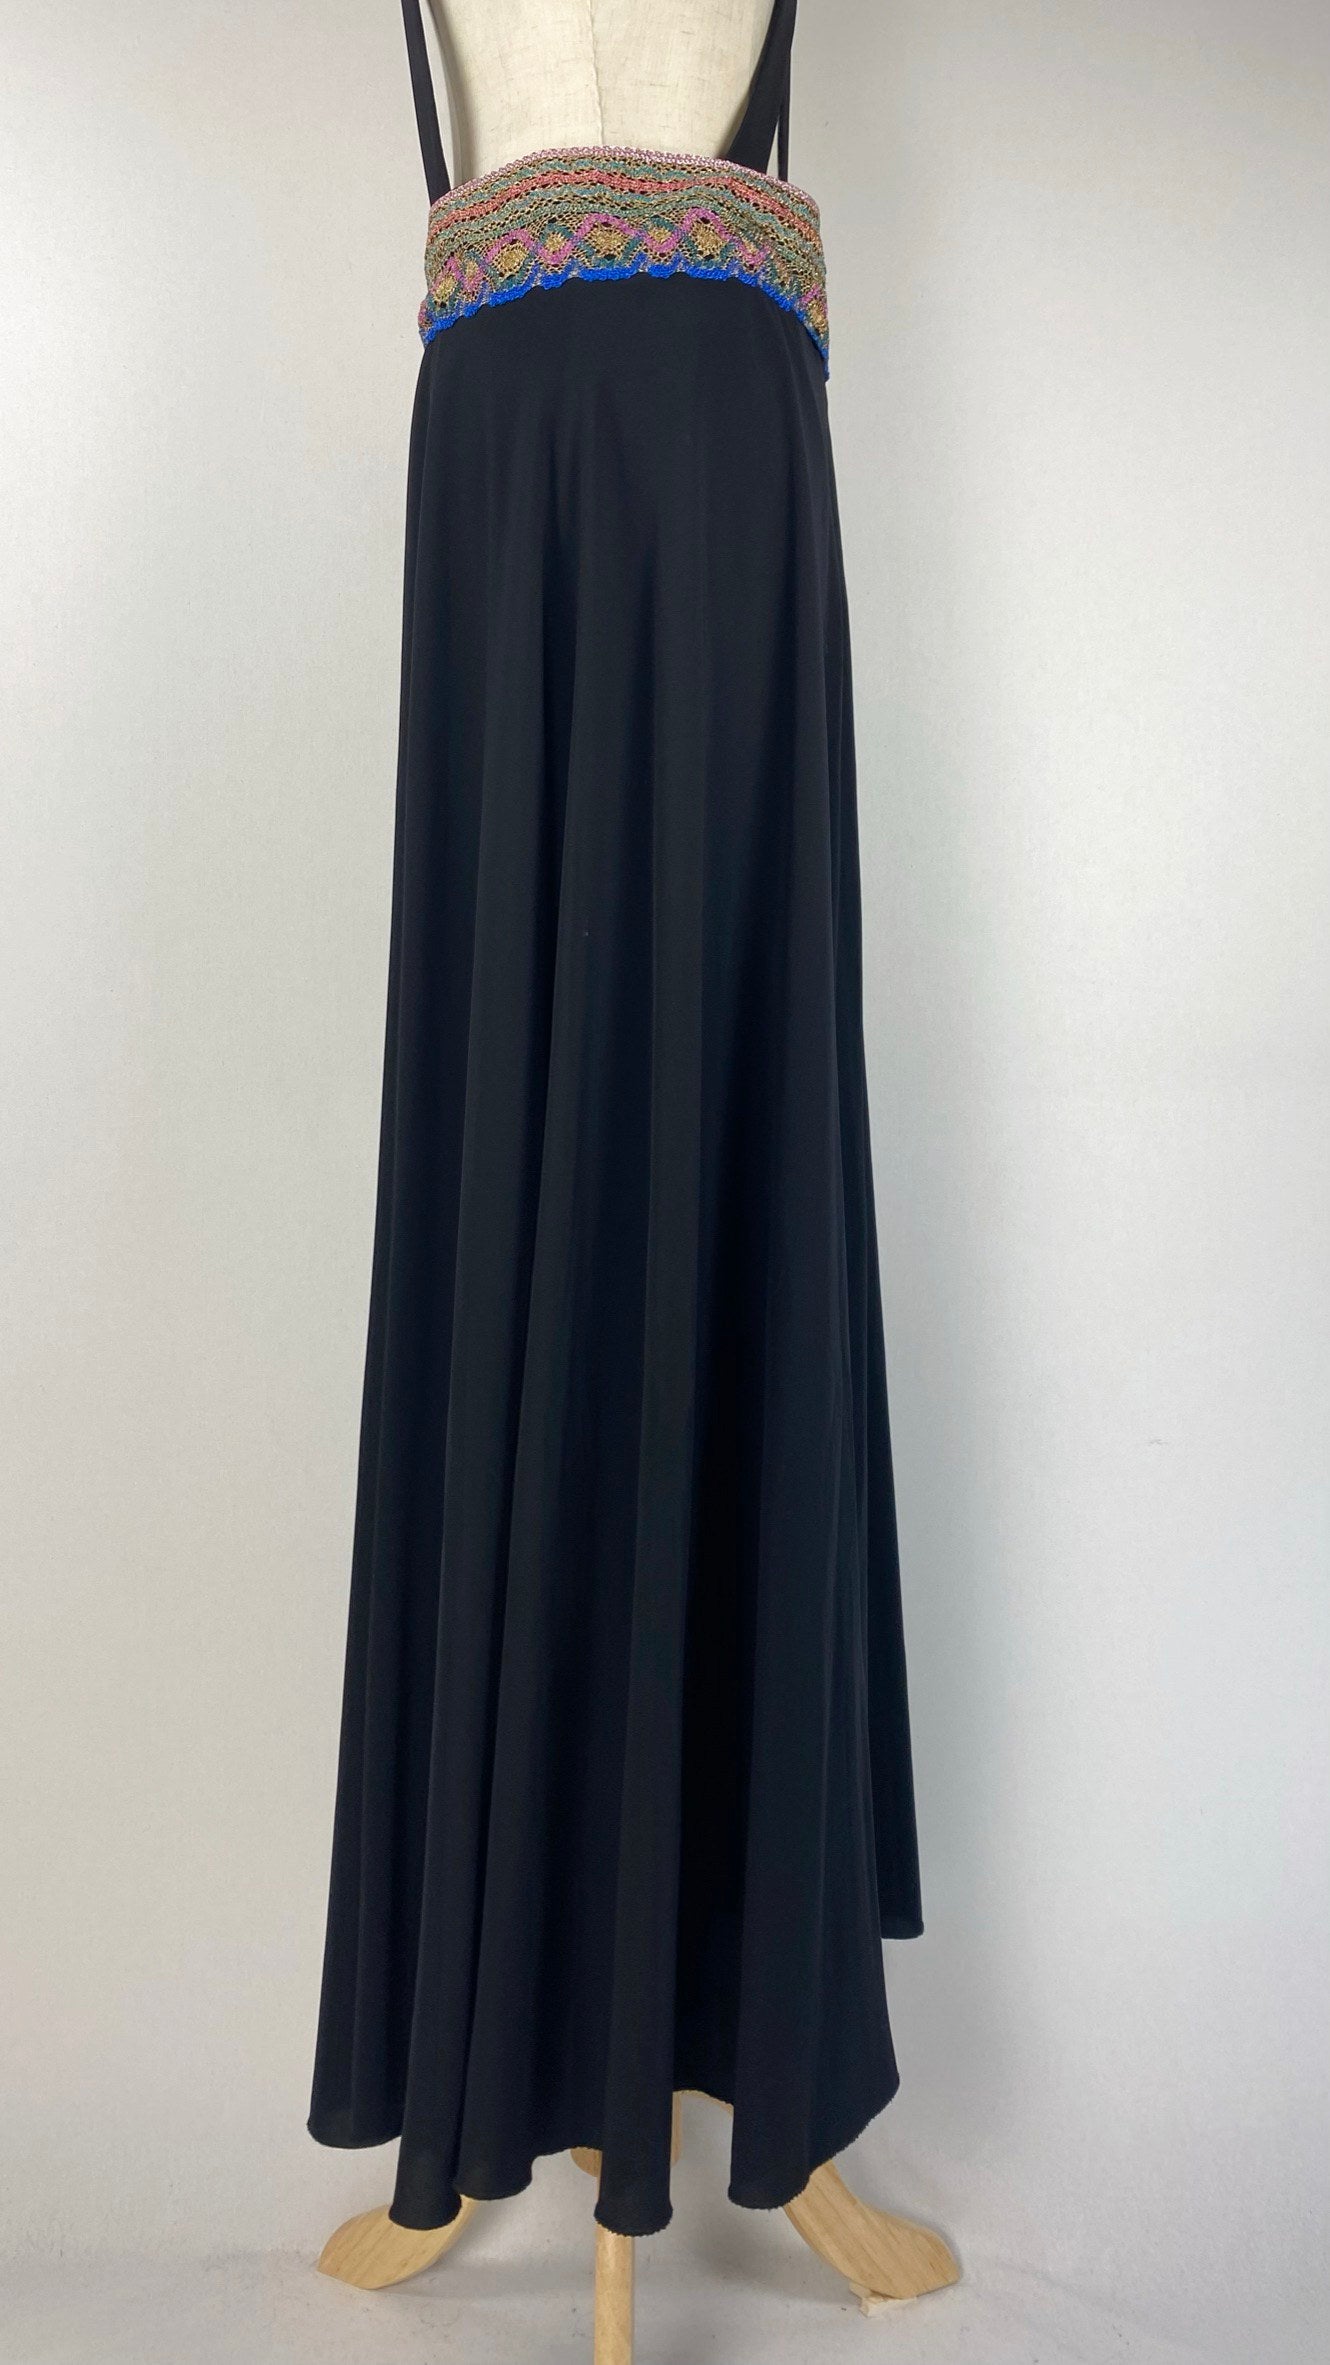 Wide Waist Maxi Skirt with Suspenders, Black